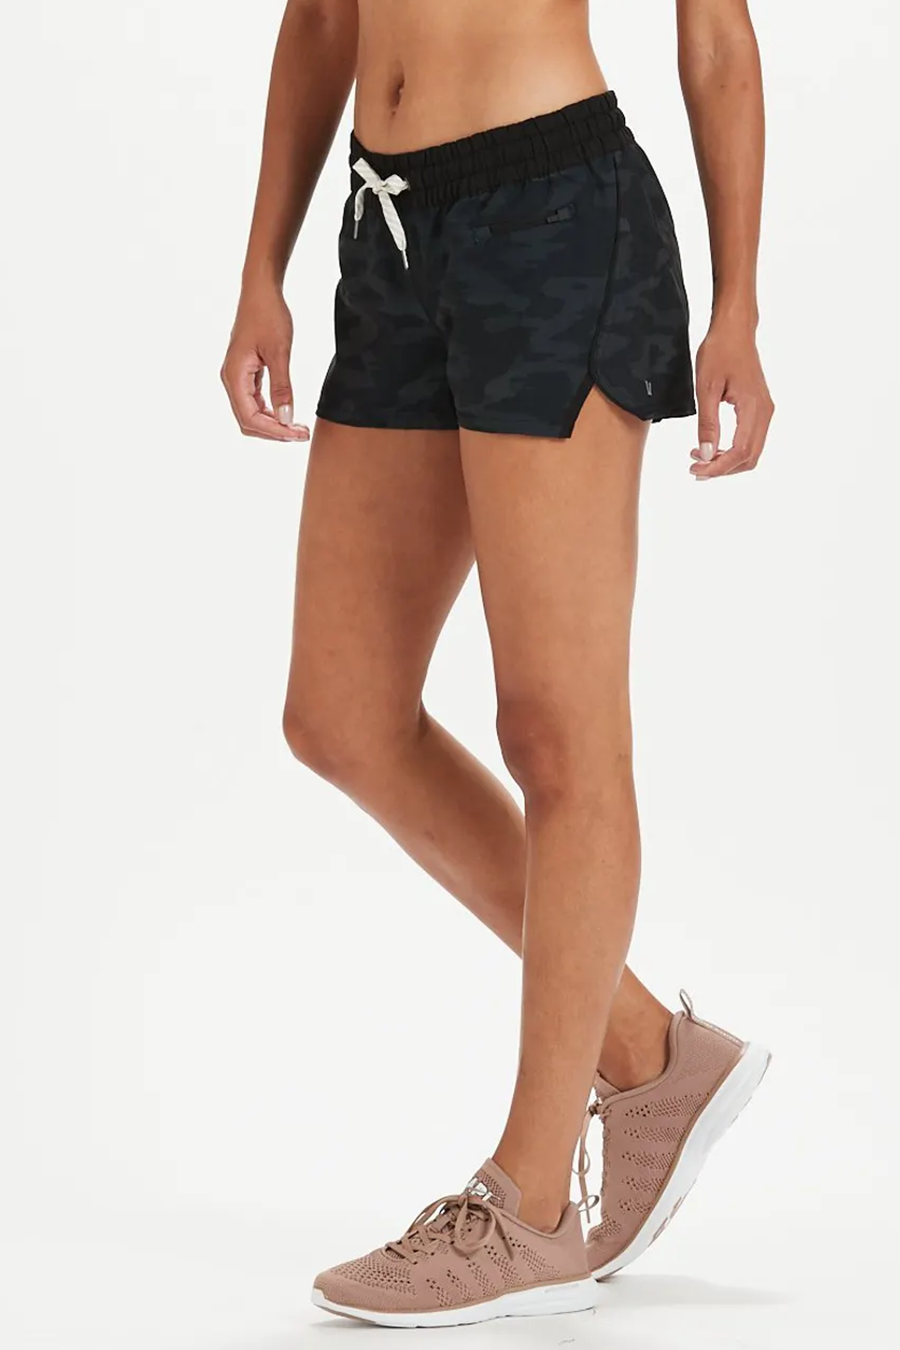 Clementine Short | Black Watercolor Camo - Main Image Number 1 of 2